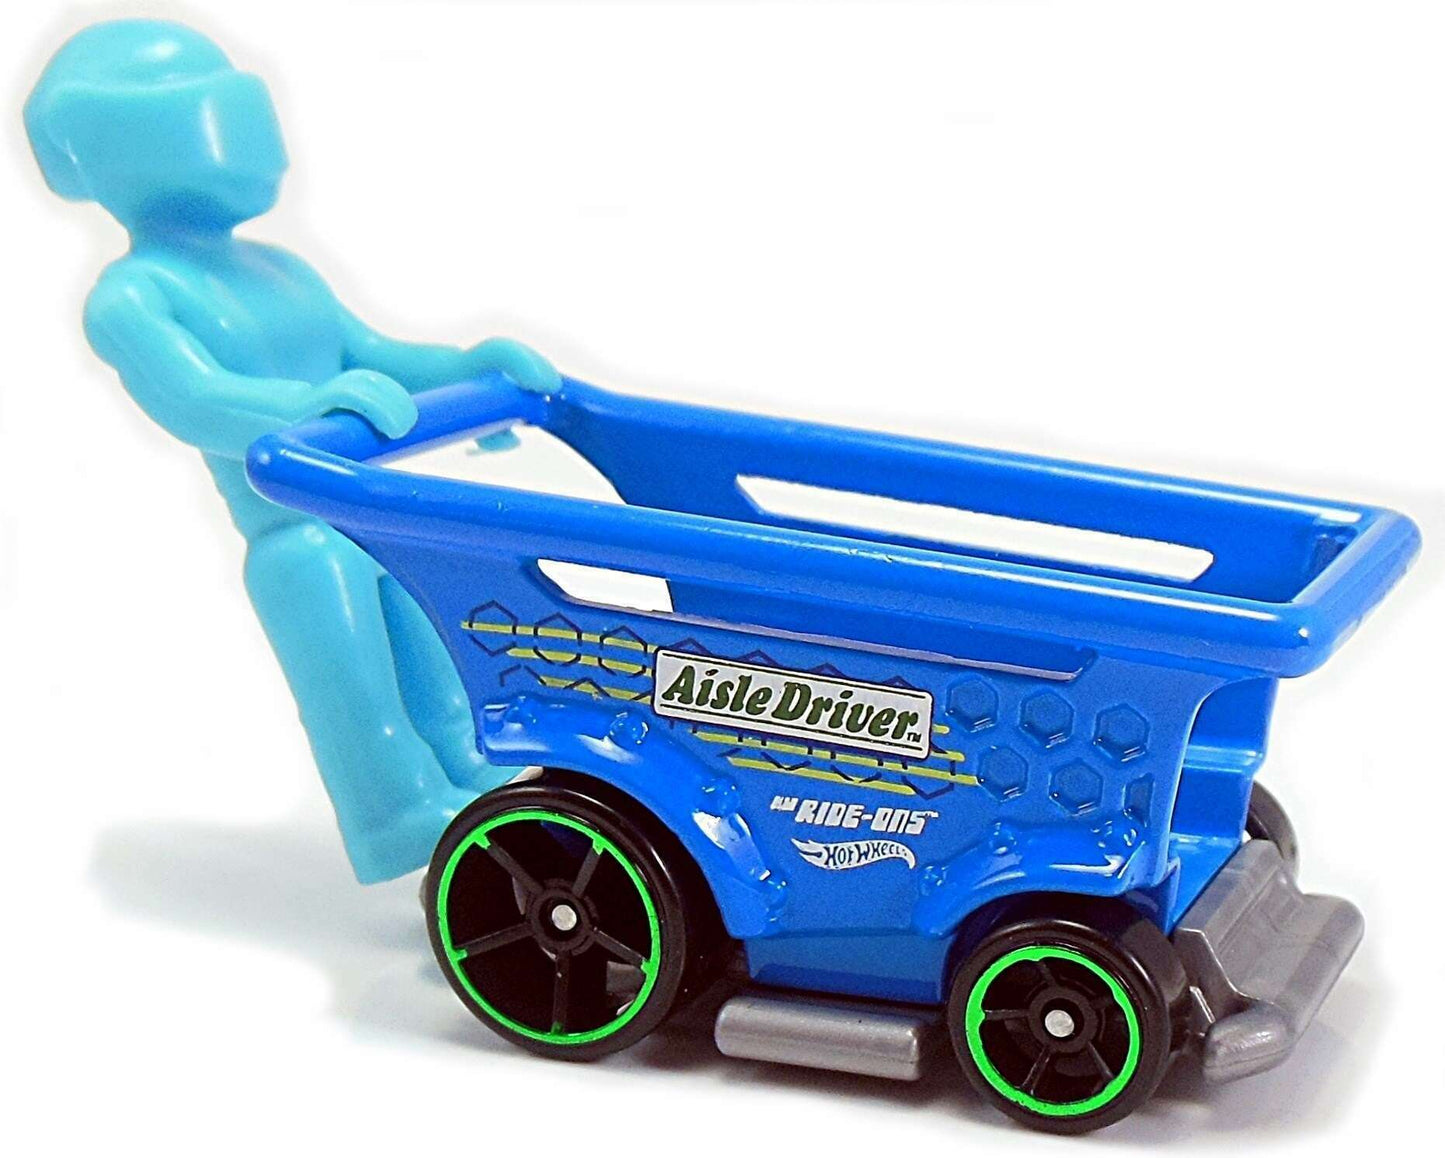 Hot Wheels 2017 - Collector # 235/365 - HW Ride-Ons 2/5 - New Models - Aisle Driver - Blue - Figures can Attach - USA Card